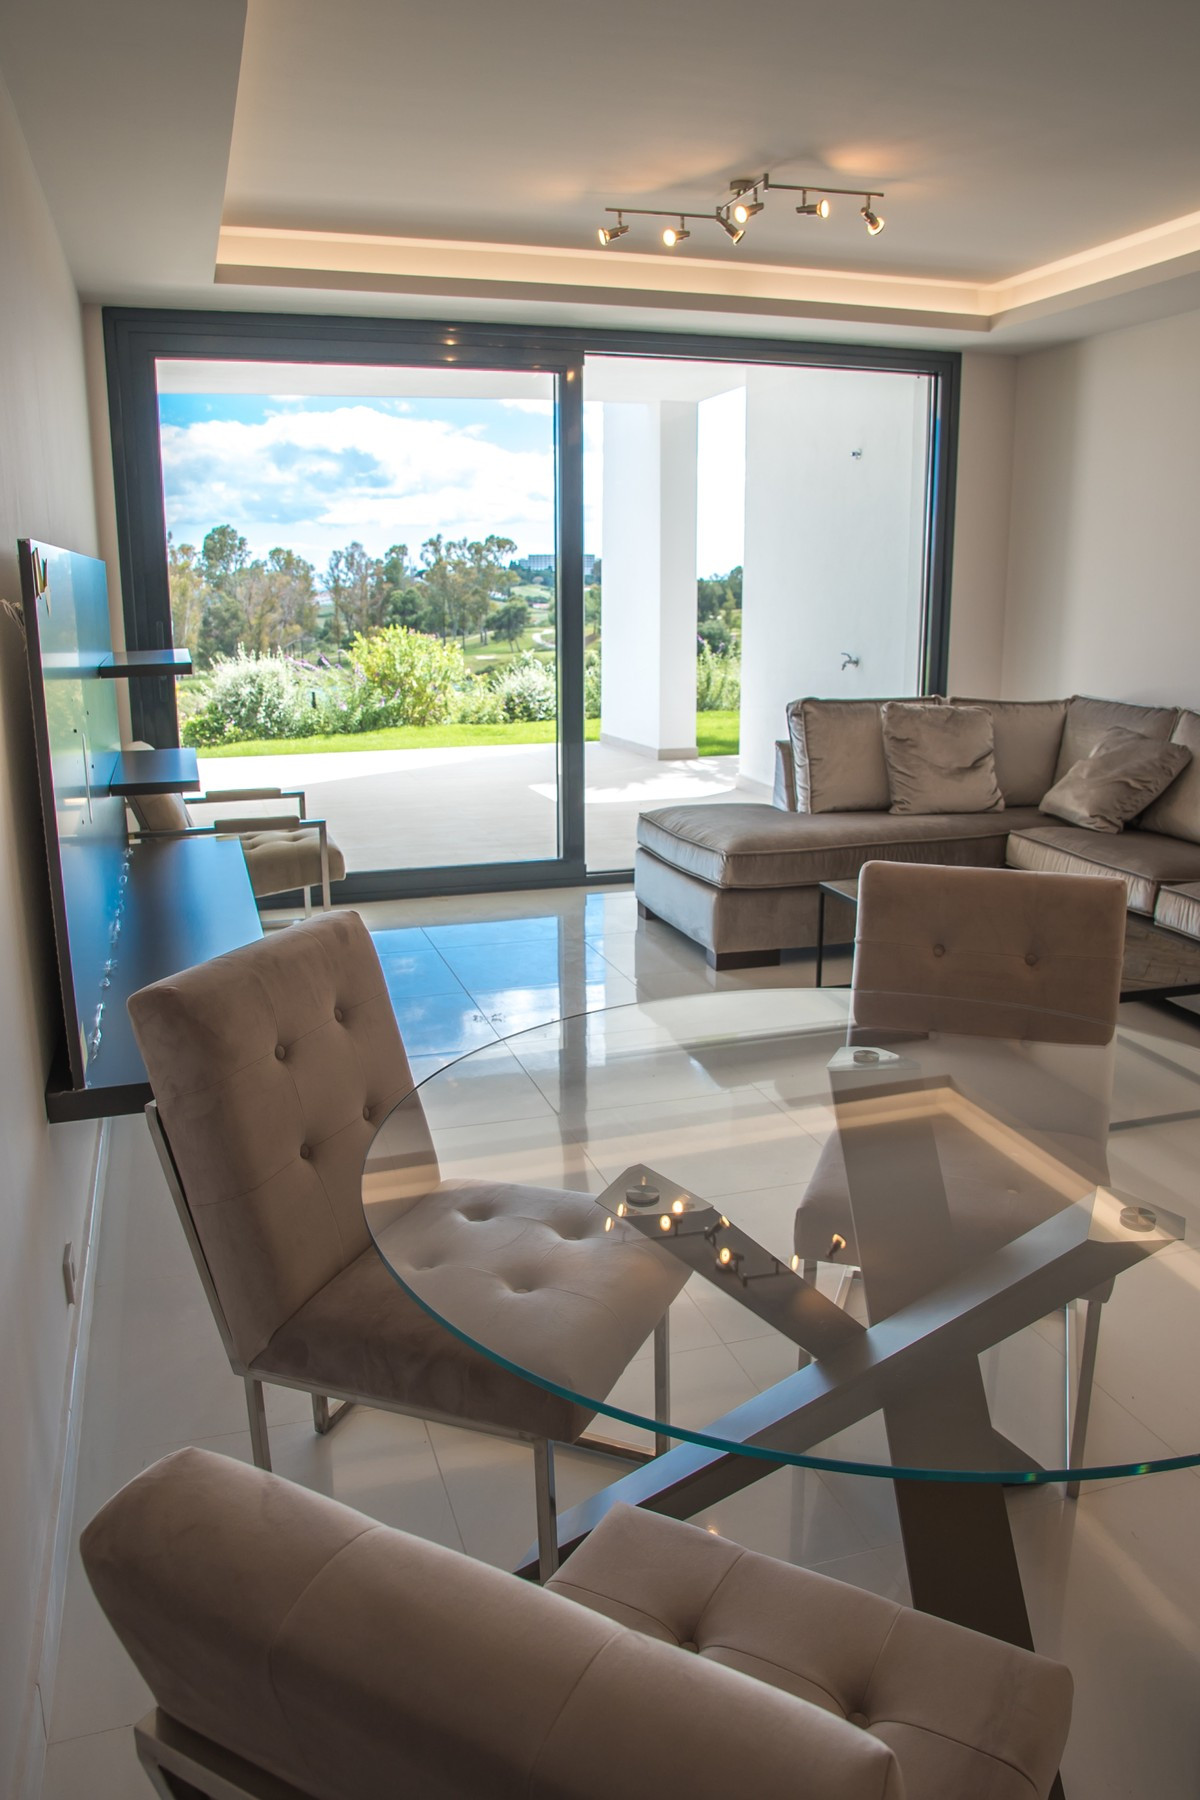 Qlistings - Luxury and Contemporary Apartment in Atalaya, Costa del Sol Property Image